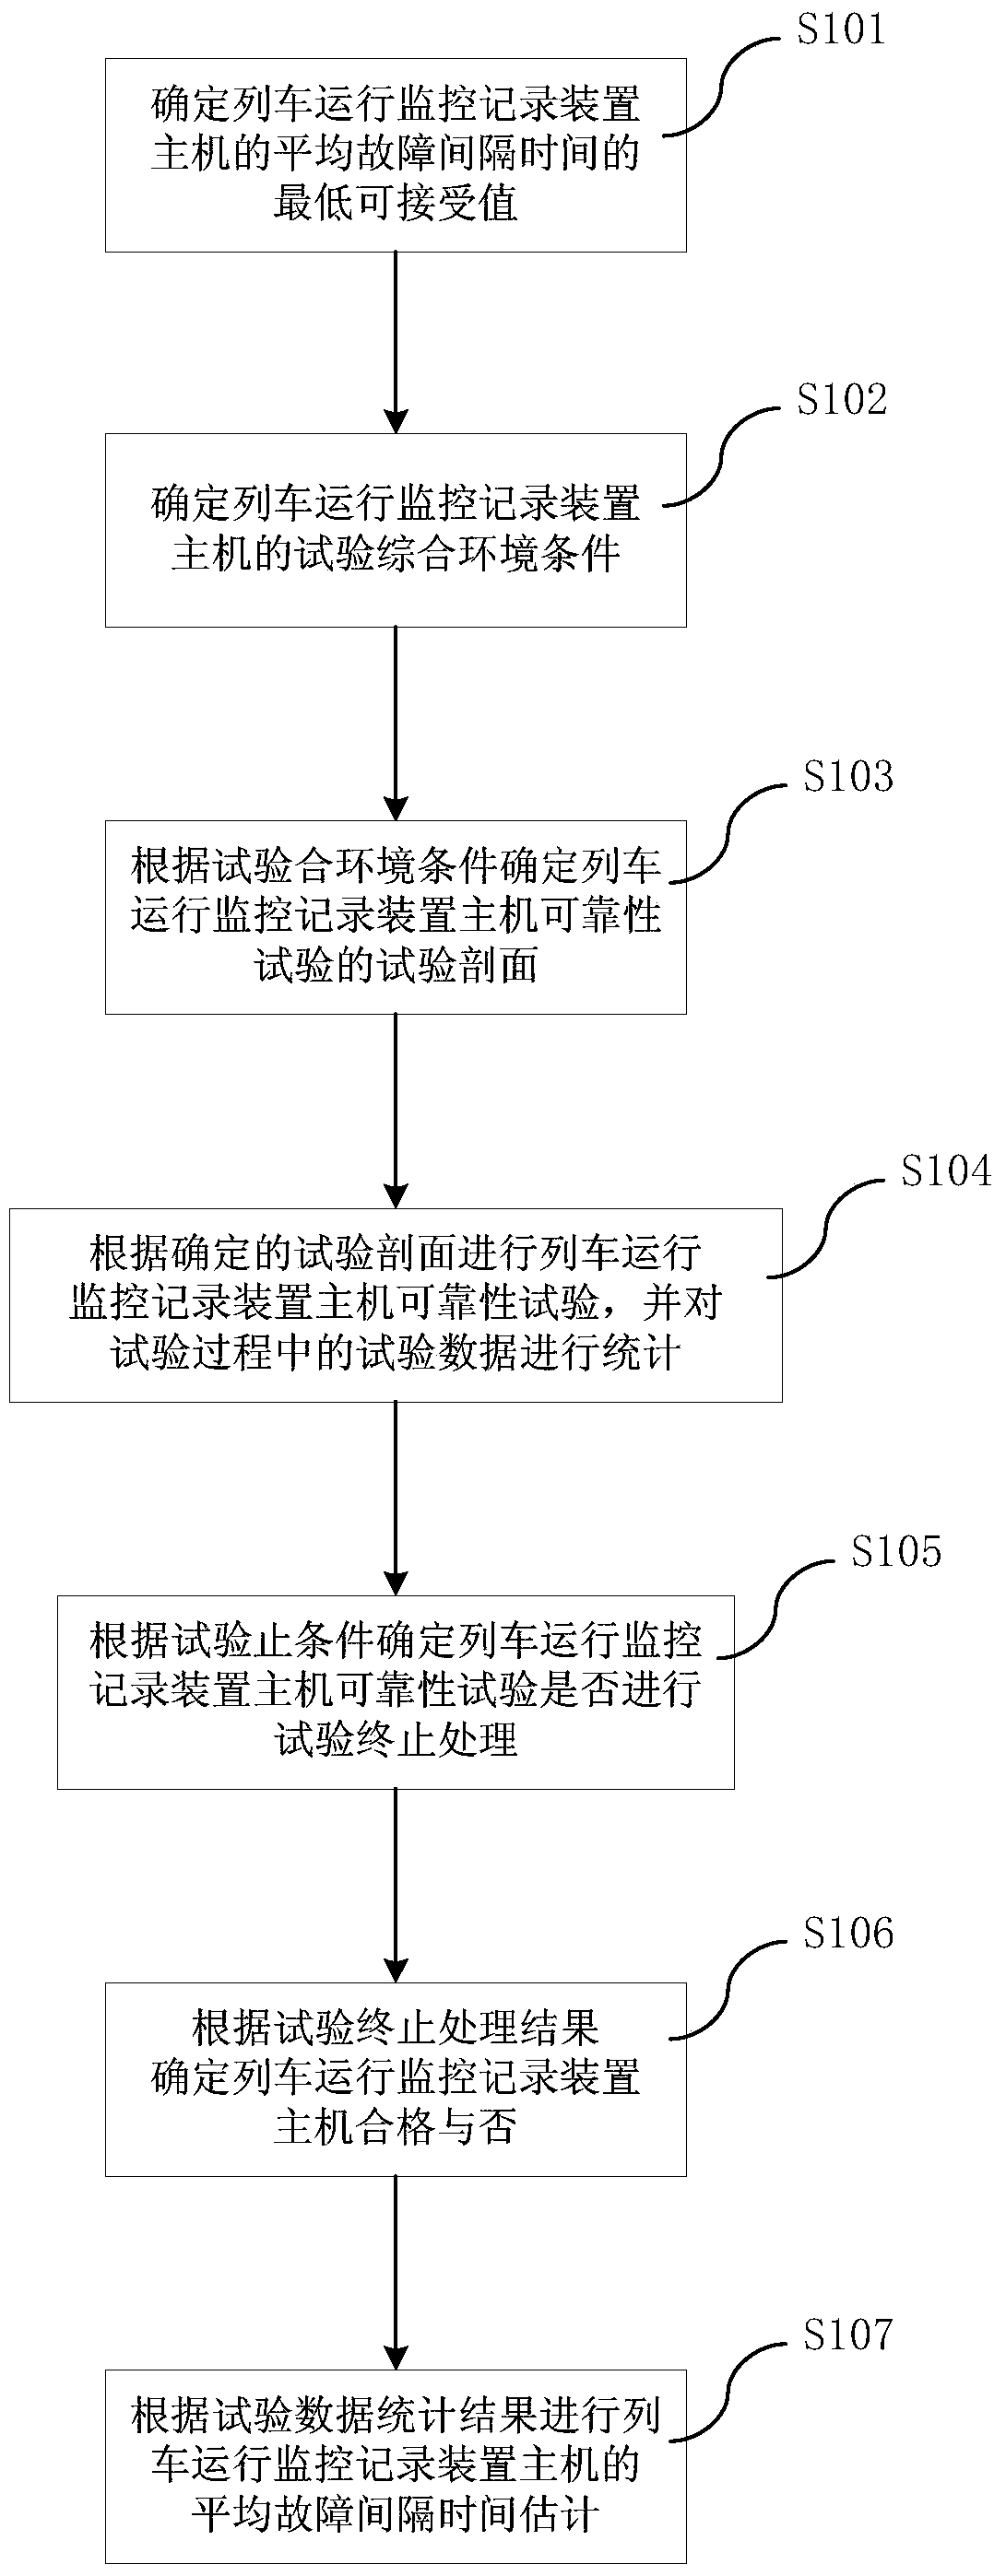 A reliability test method for the main engine of a train operation monitoring and recording device